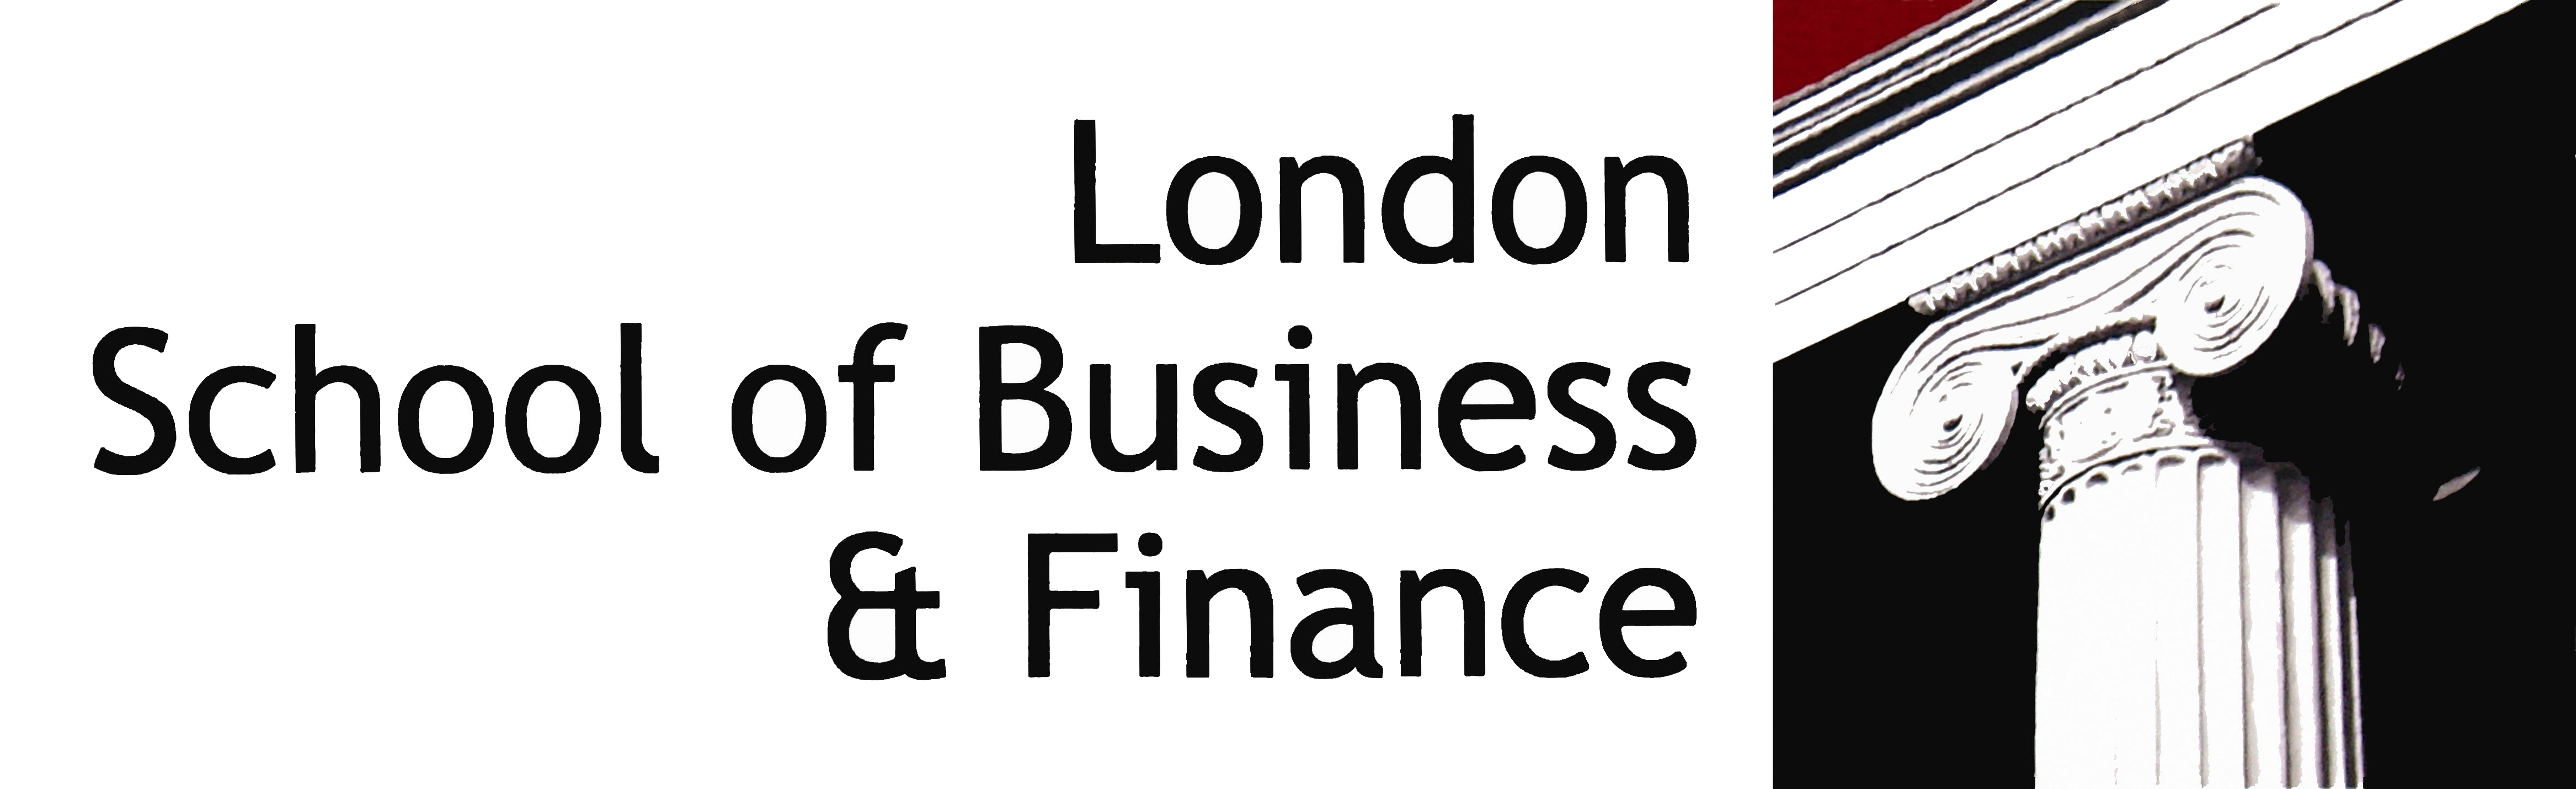 london school of business and finance